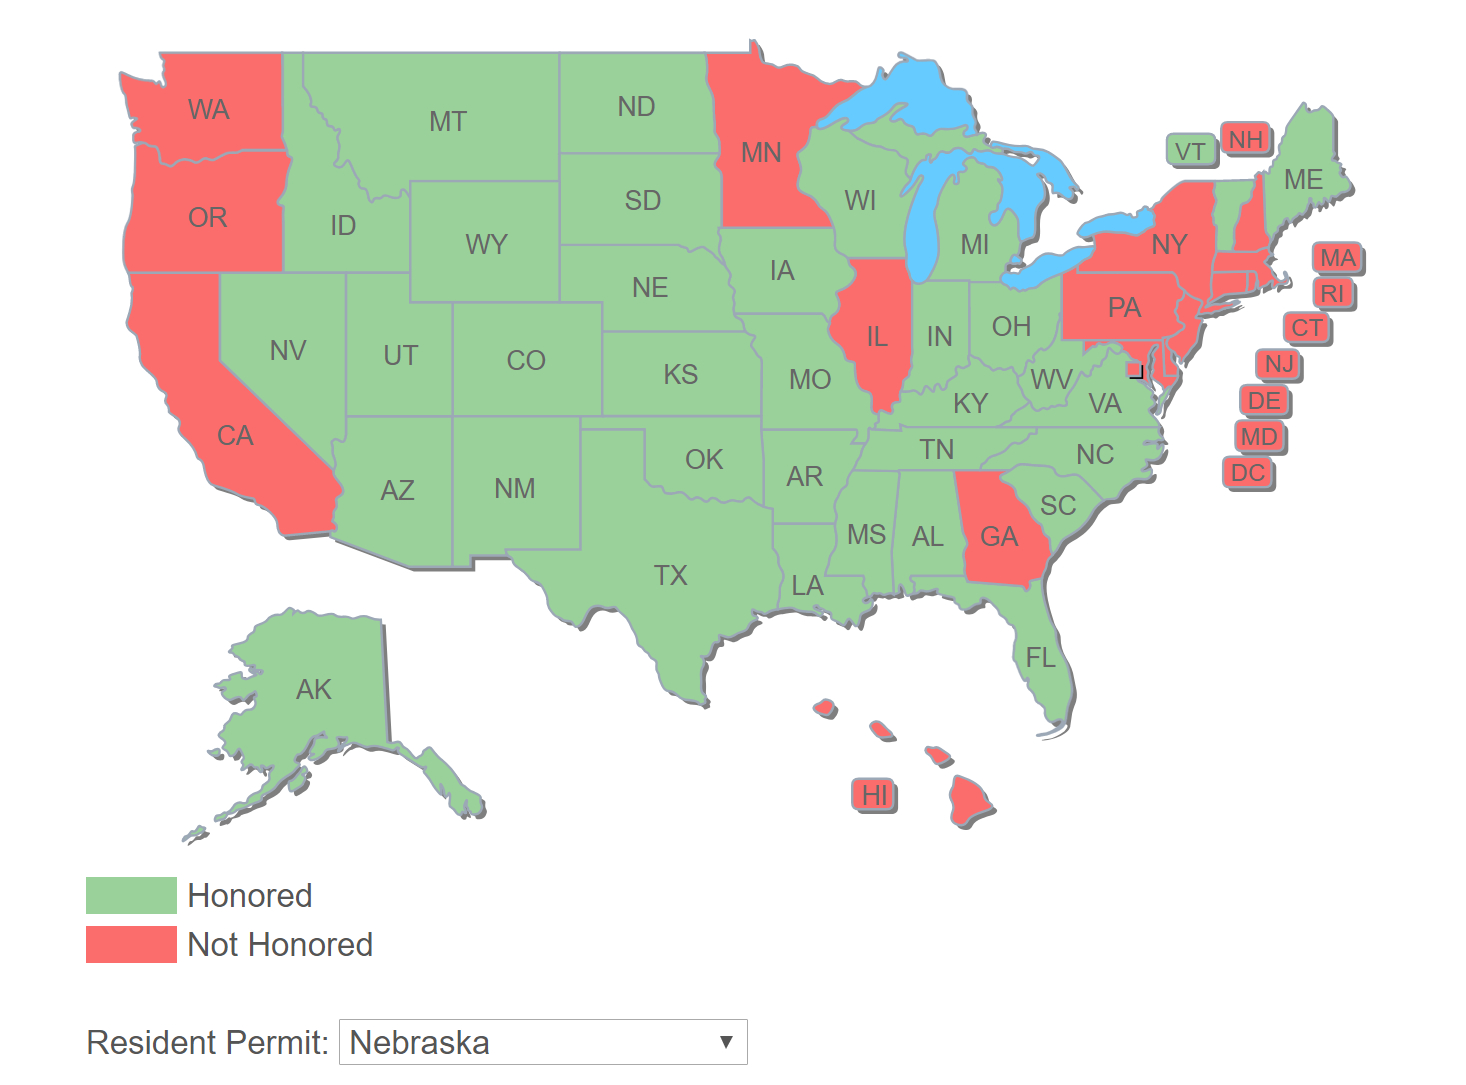 South Carolina Adds Ne And Mn To List Of Ccw Reciprocity States - Florida Concealed Carry Permit Reciprocity Map